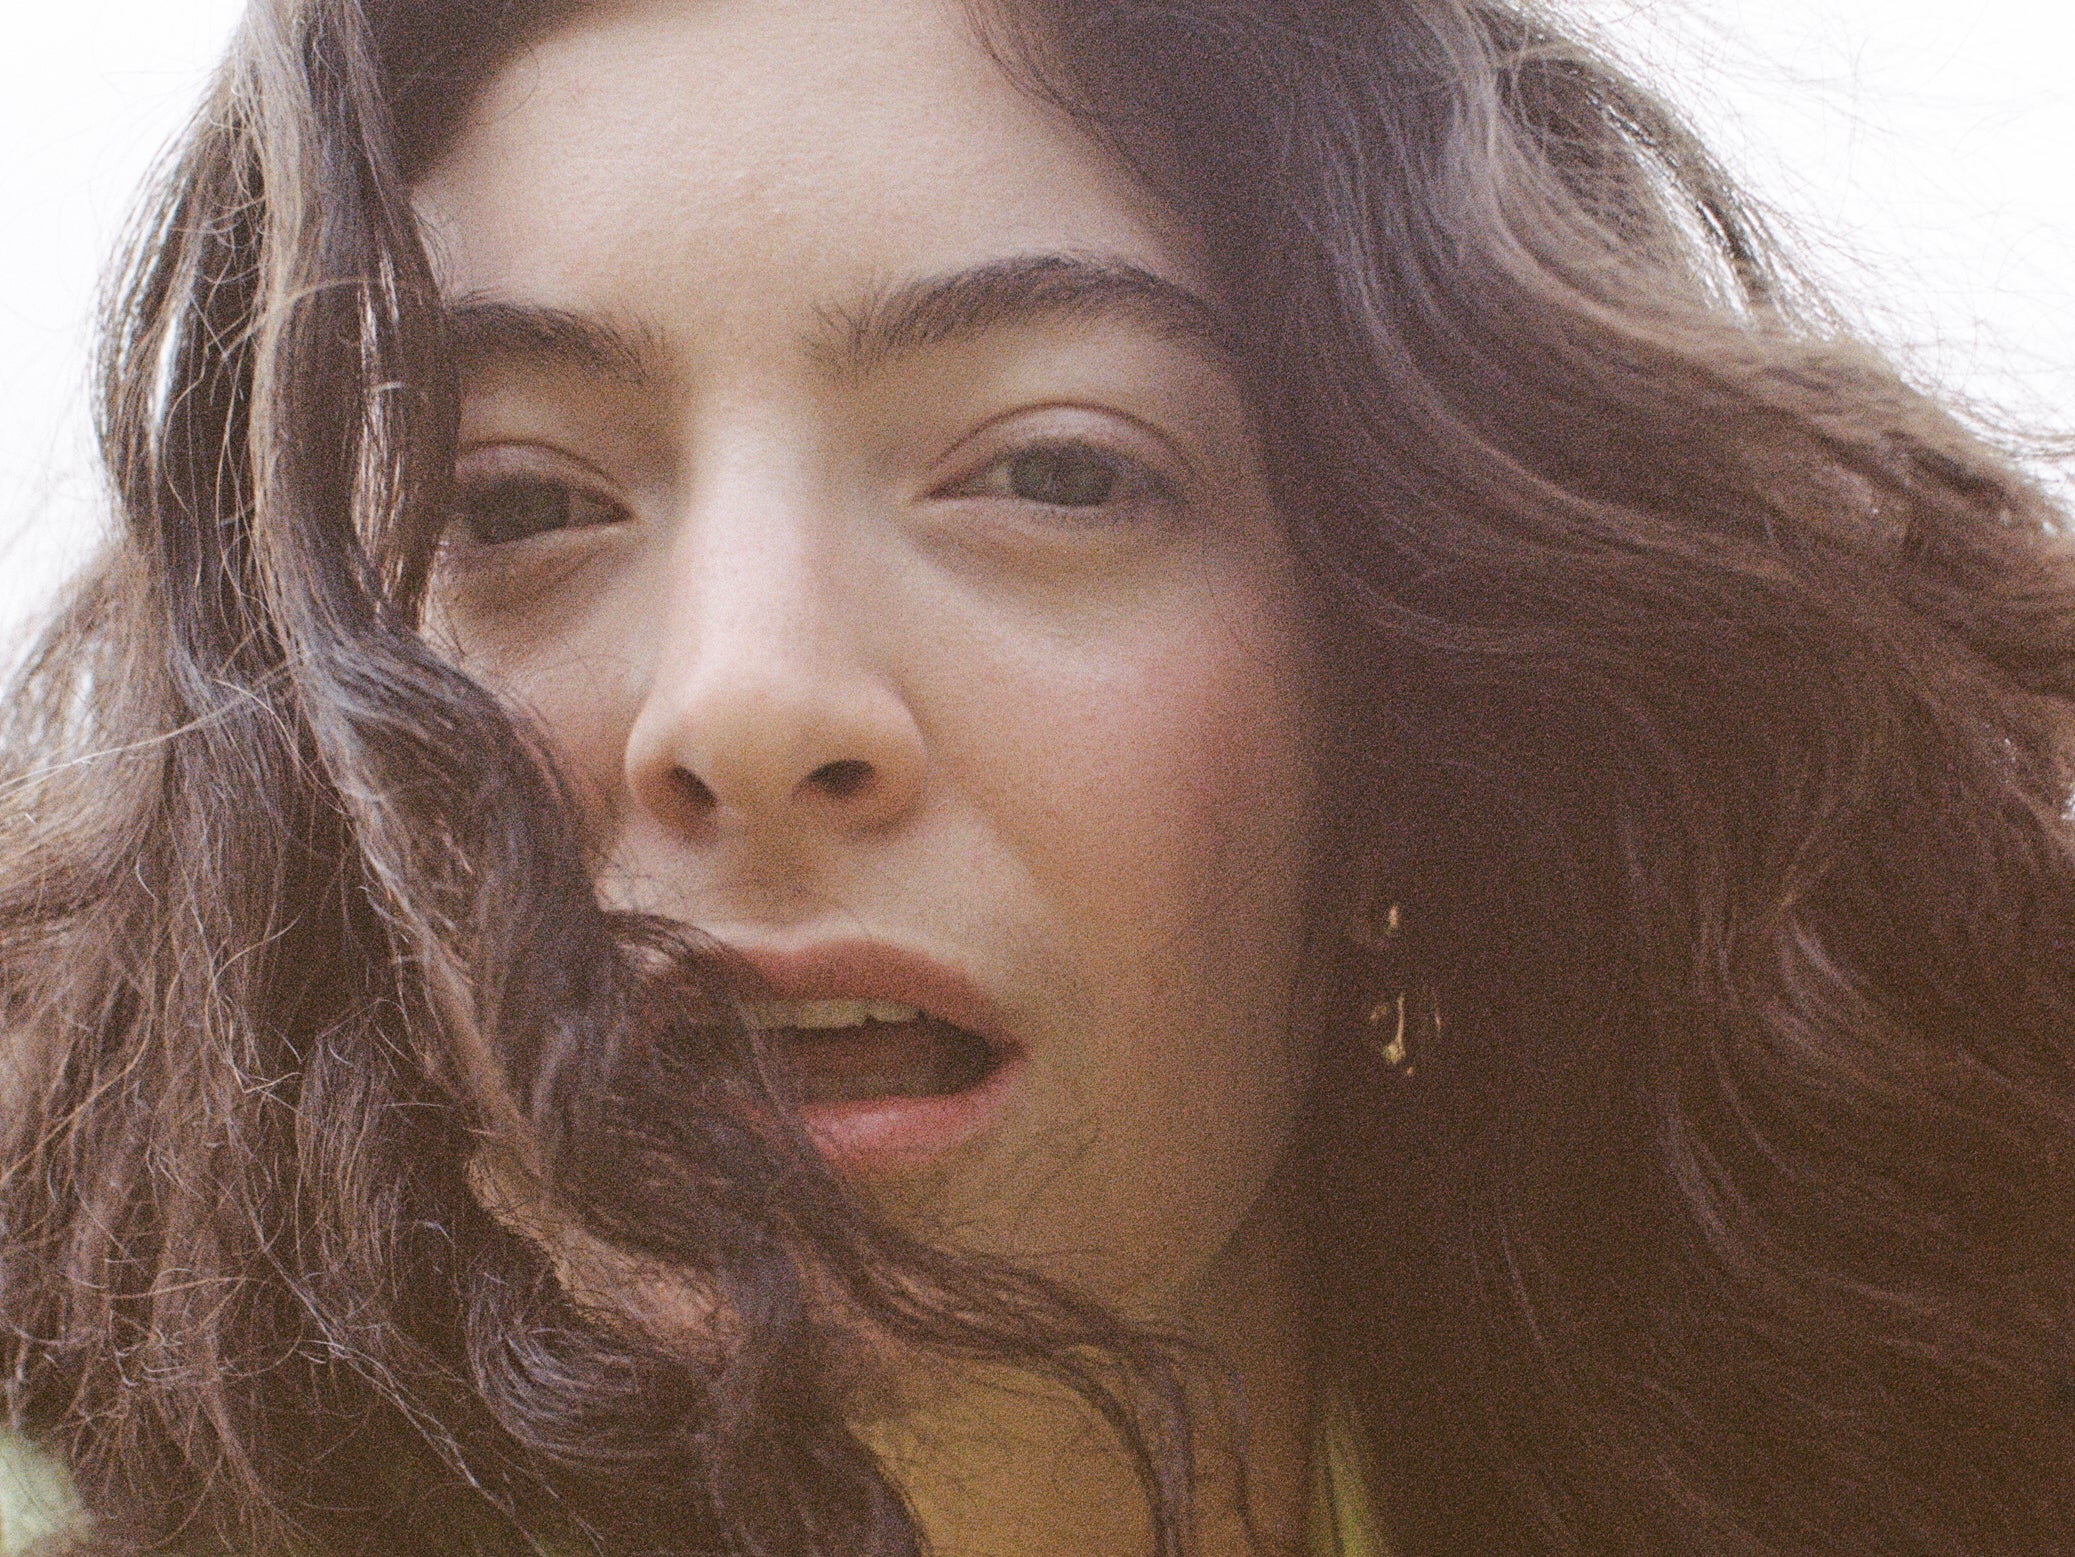 Lorde’s new album pays tribute to Joni Mitchell without really connecting